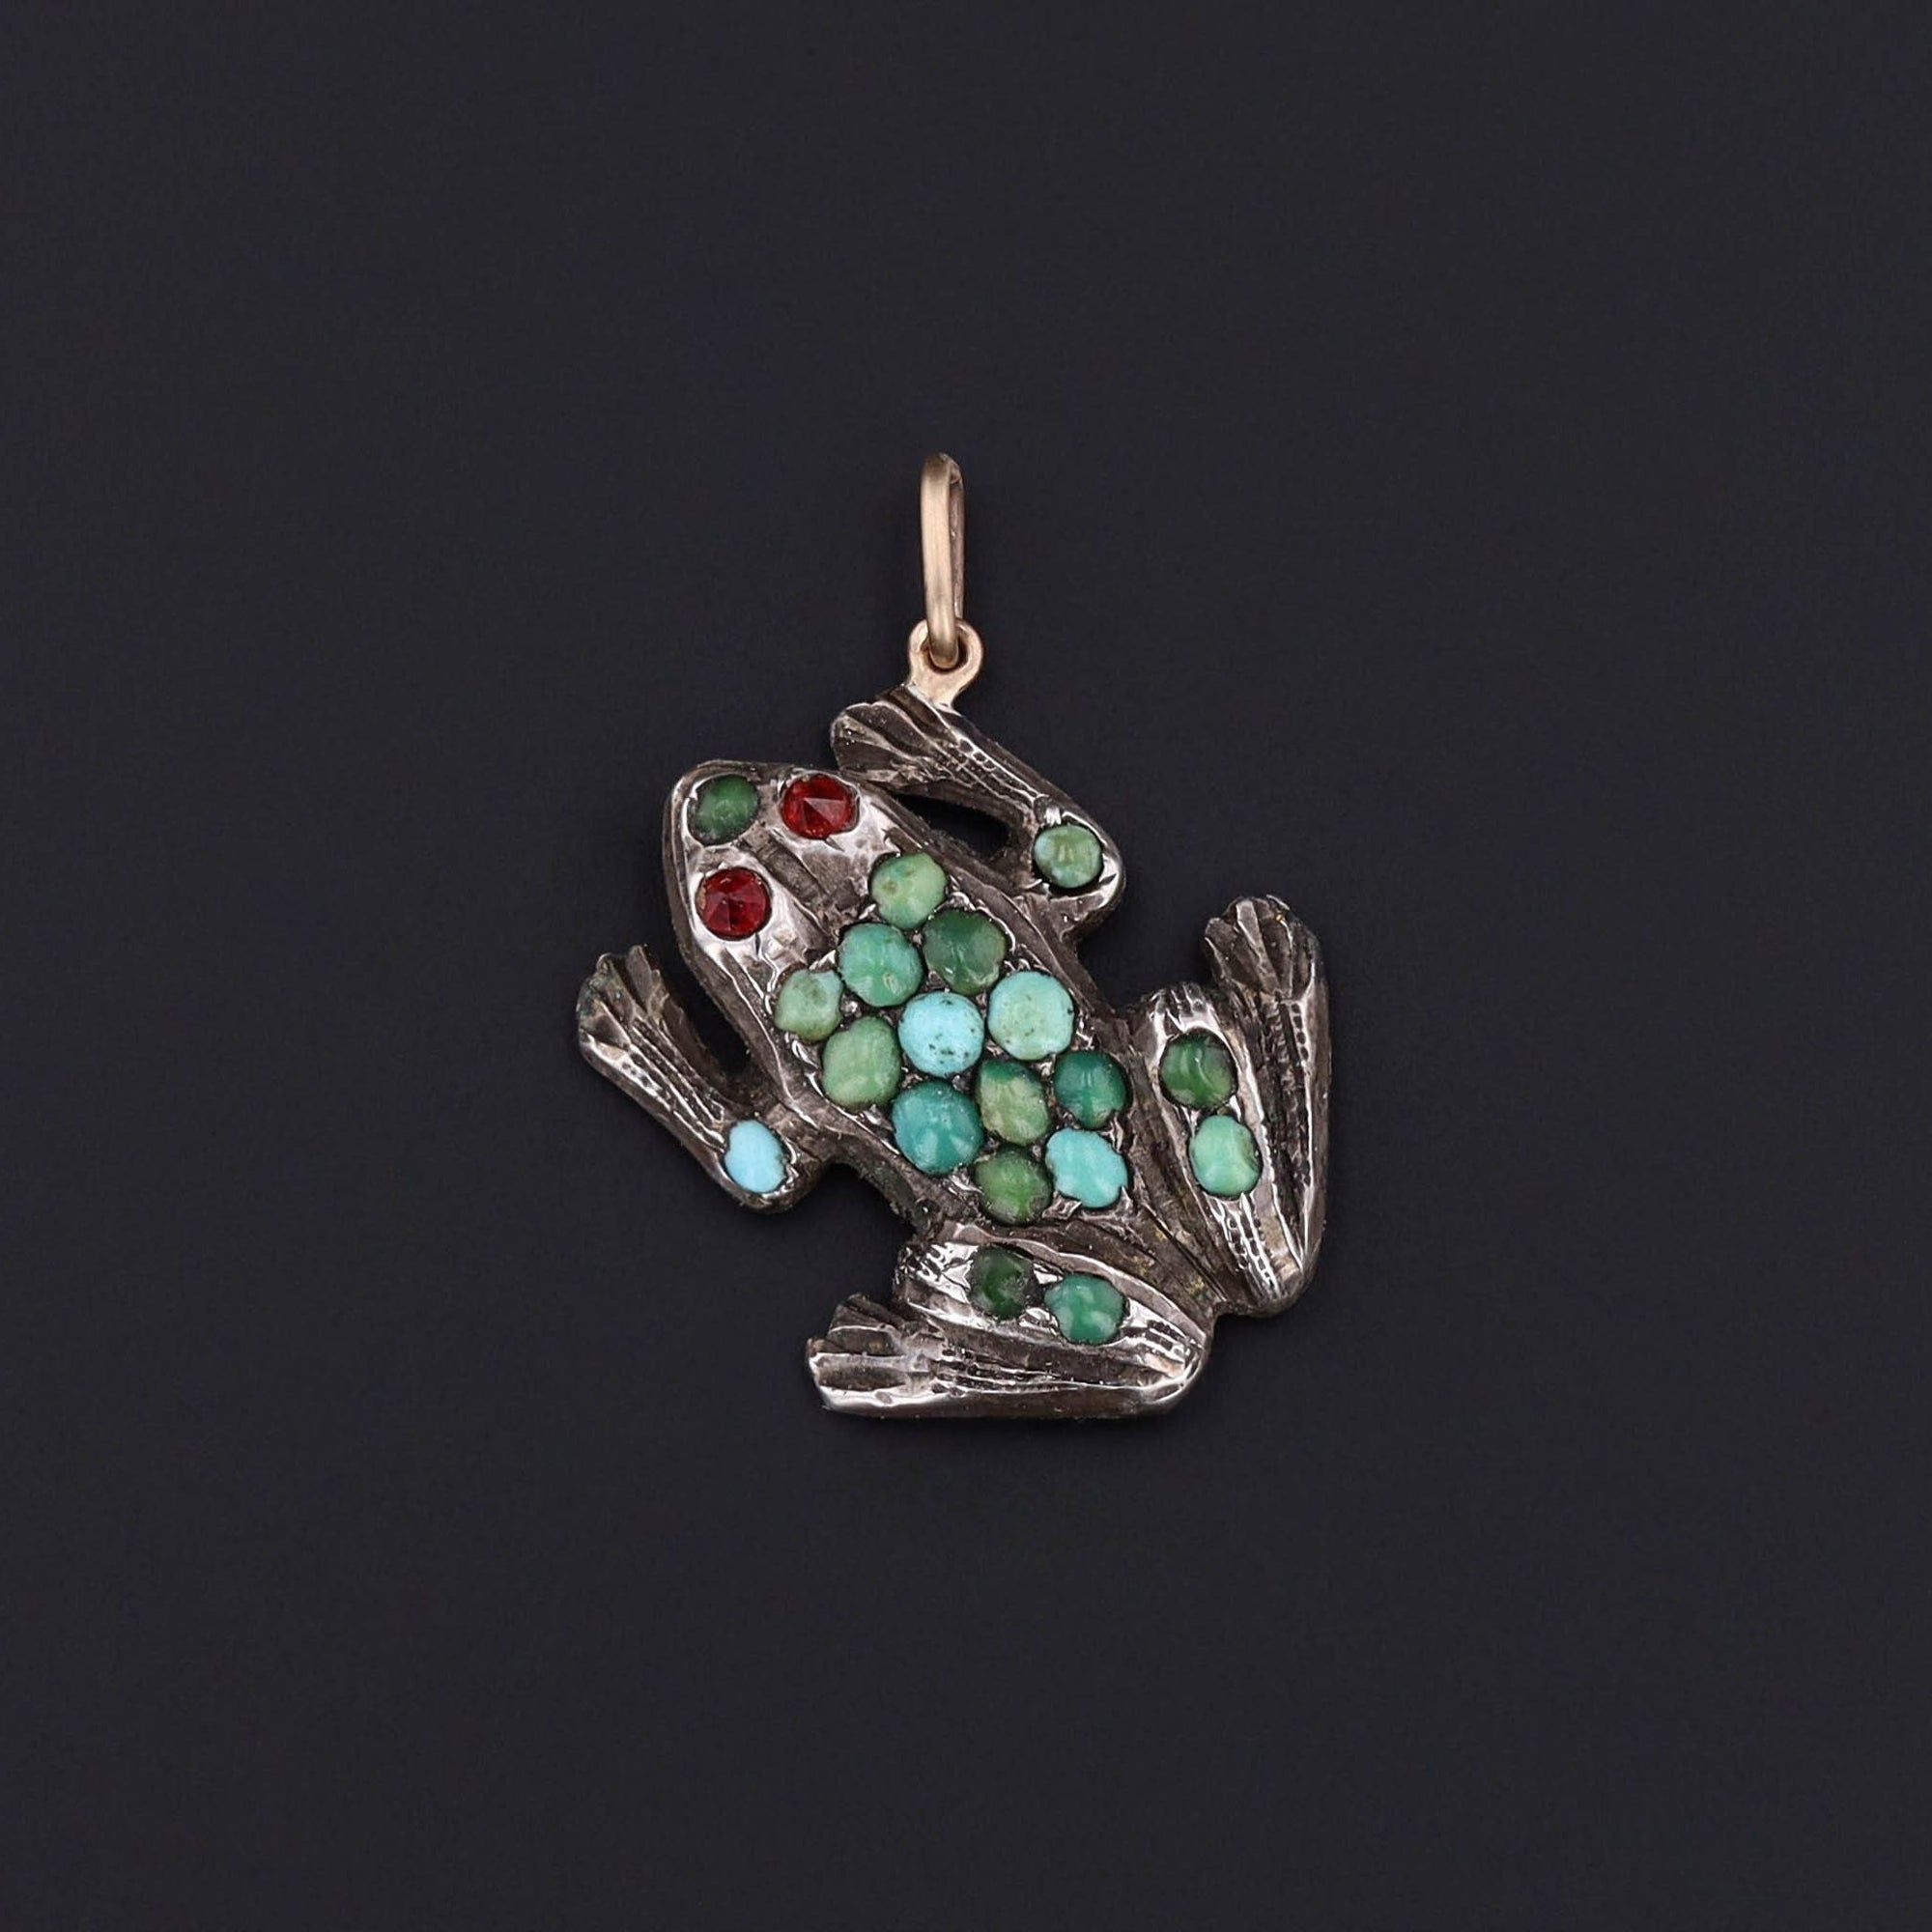 Antique Turquoise and Silver Frog Pendant